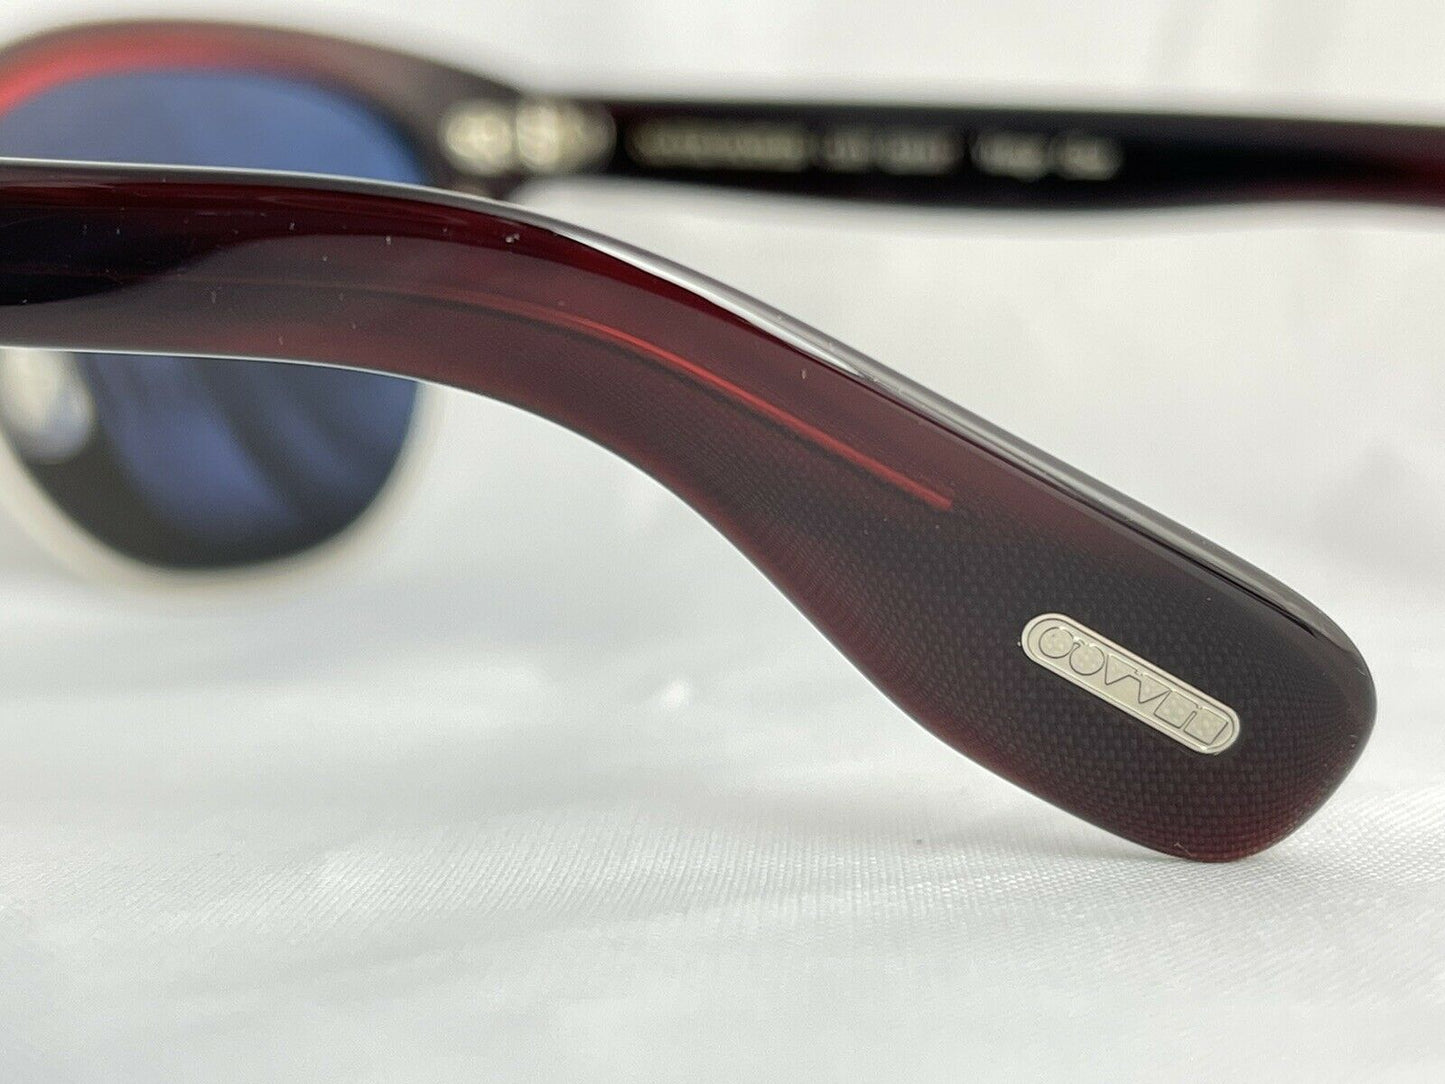 Oliver Peoples Cary Grant 2 OV5436s Sunglasses Bordeaux Bark/Carbon Grey 52mm